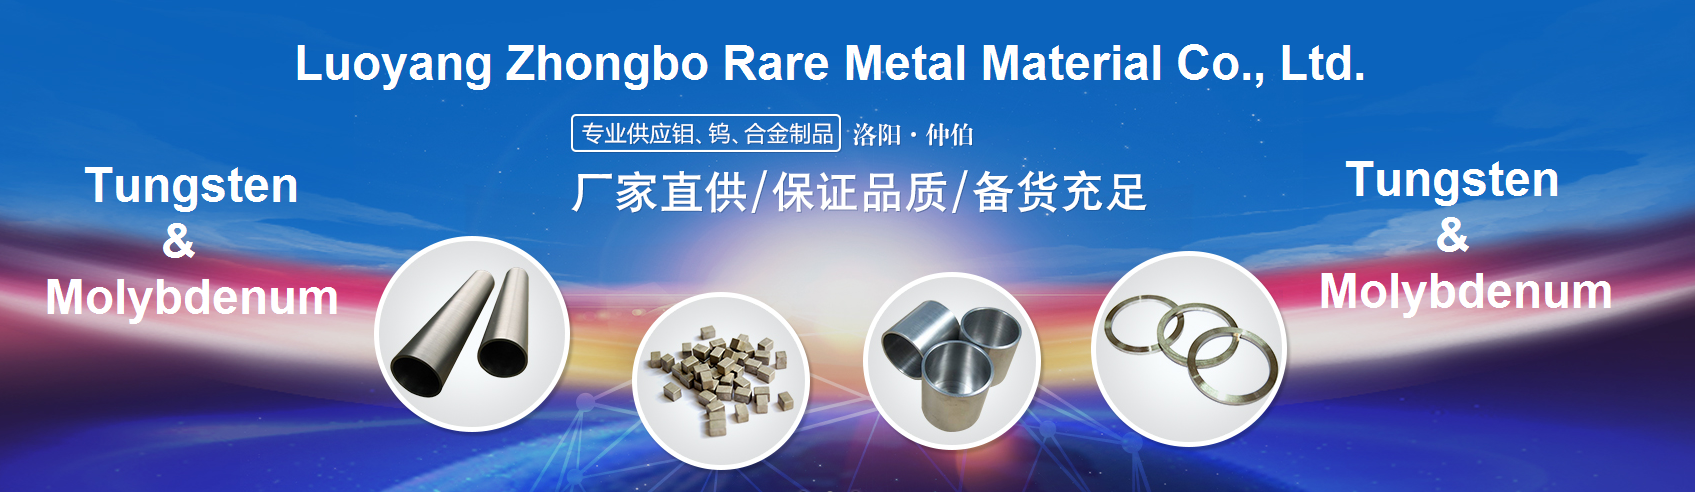 High purity polished annealed Molybdenum disk